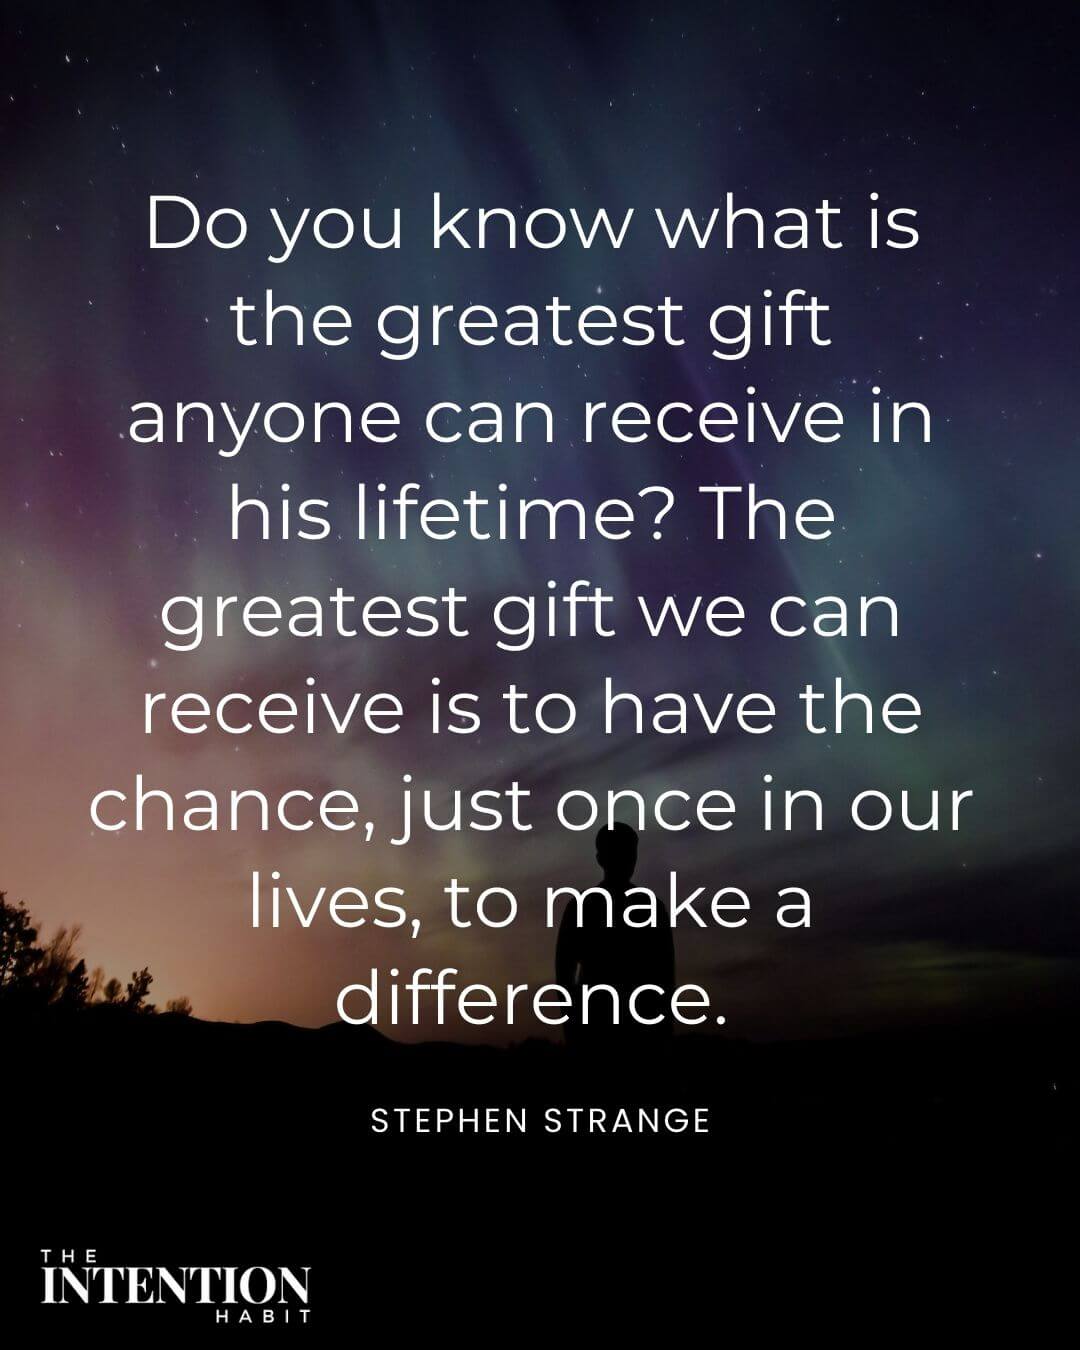 Intentional living quote - do you know what is the greatest gift anyone can recieve in his lifetime? the greatest gift we can receive is to have the chance just once in our lives to make a difference